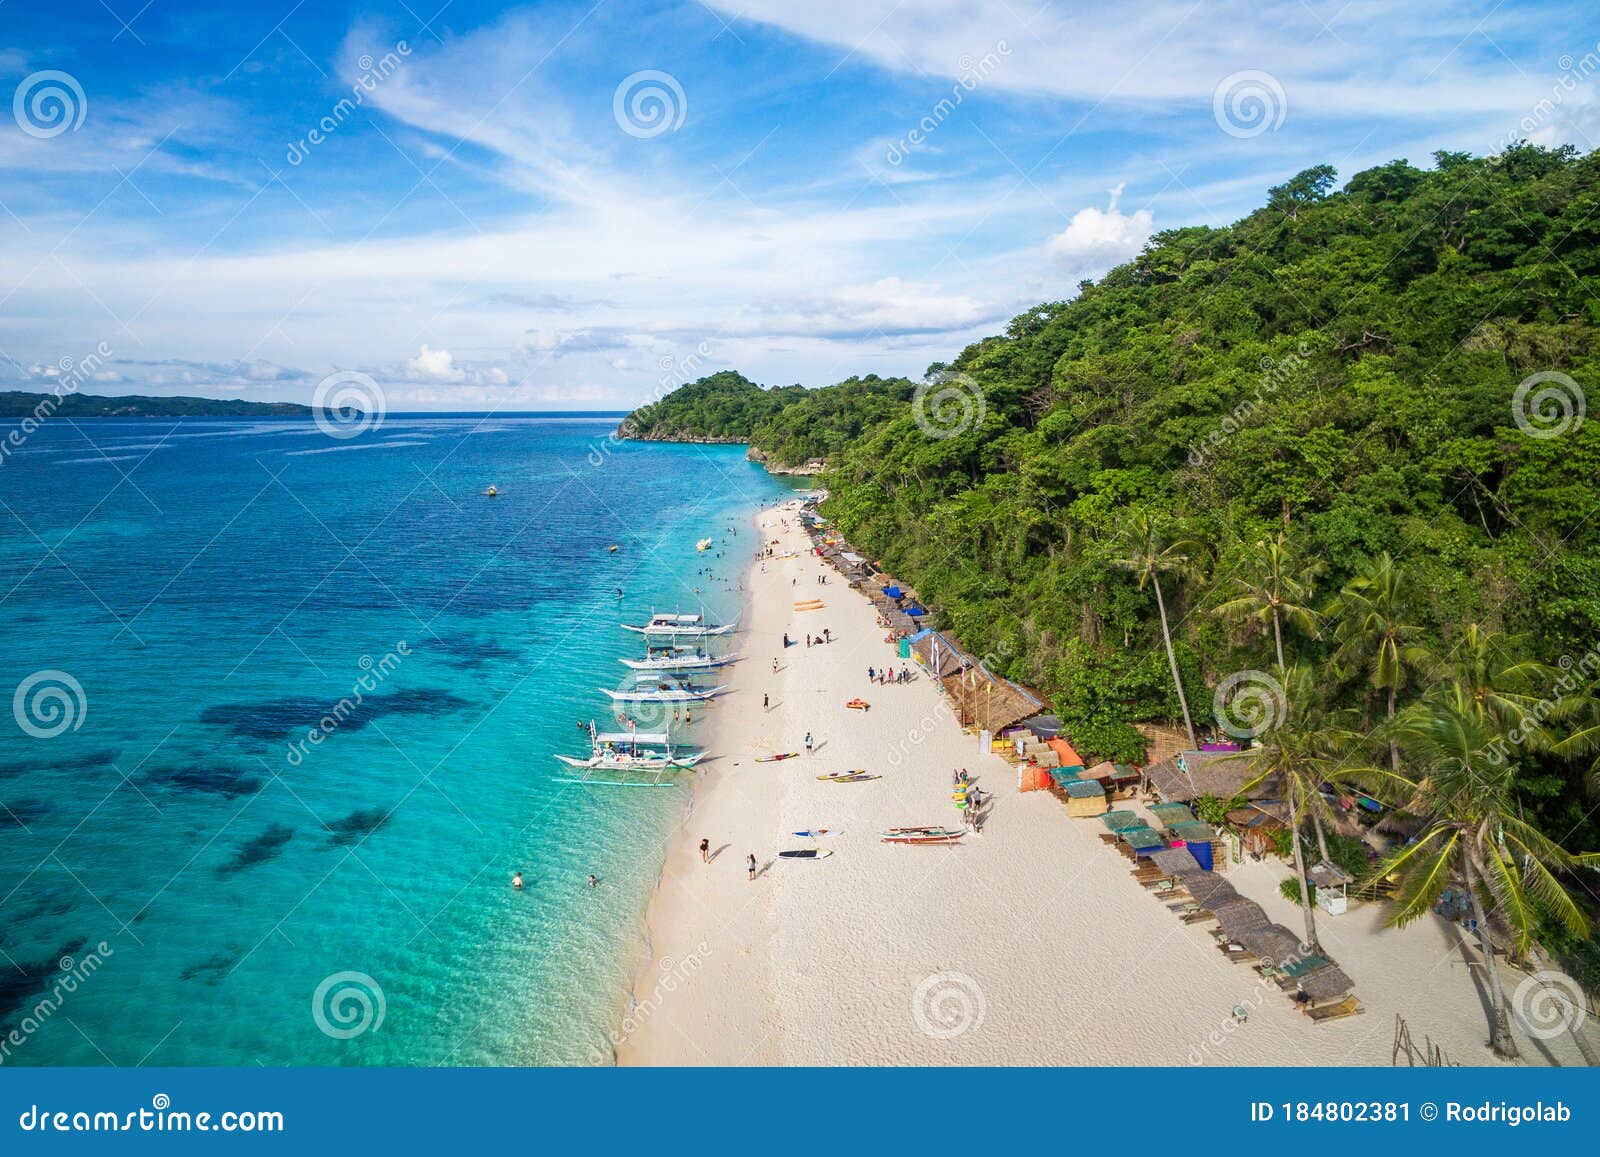 Aerial View Of White Sand Beach On Boracay Island Philippines Stock